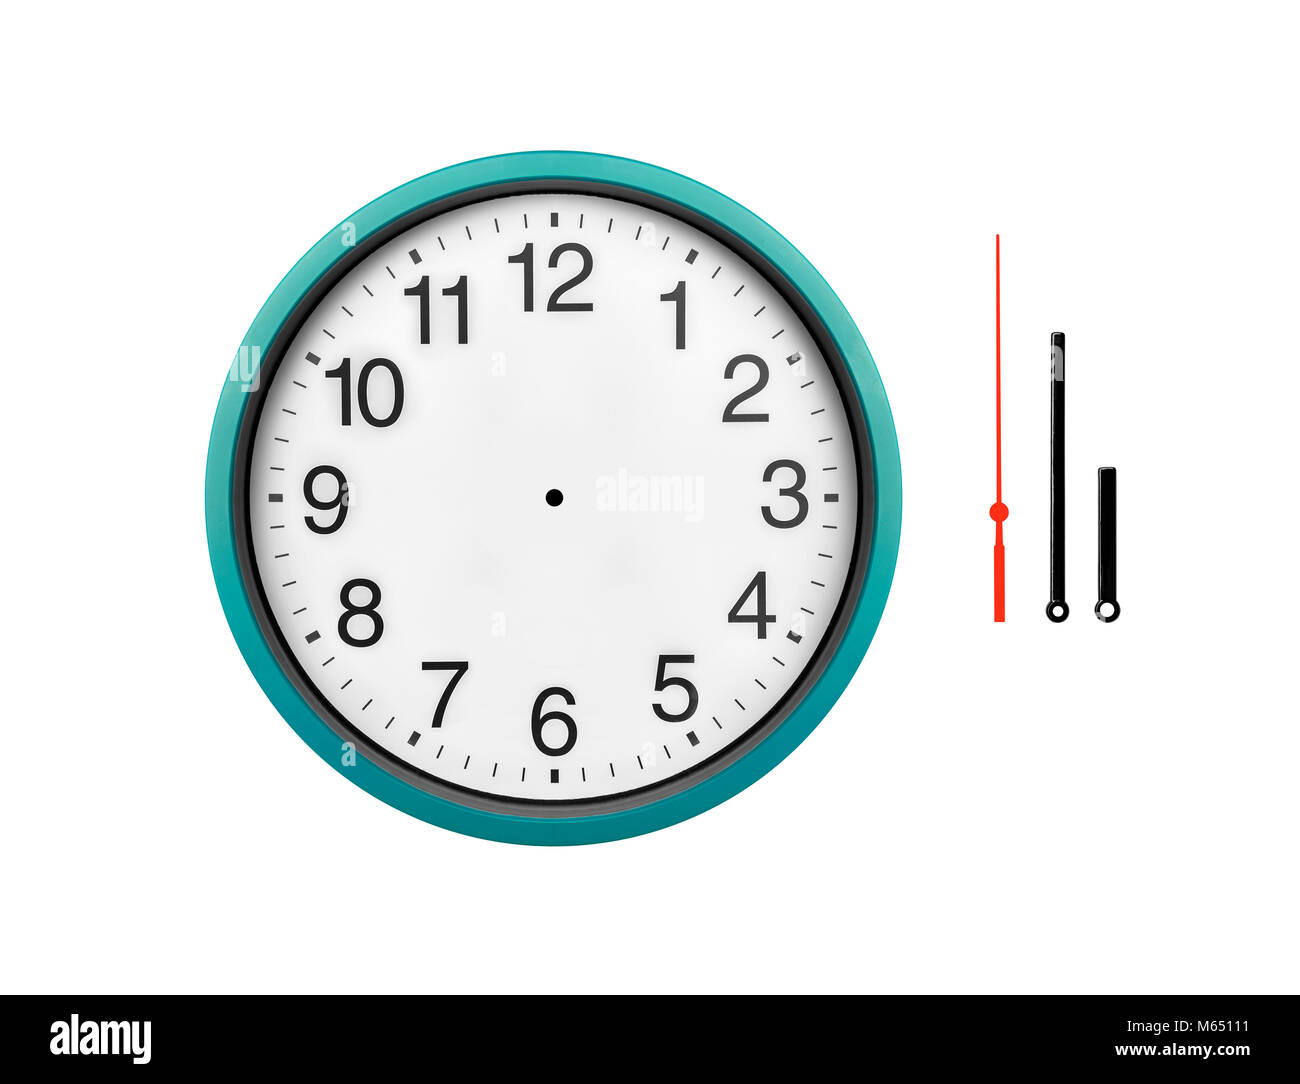 Blue wall clock isolated on a white background. Stock Photo